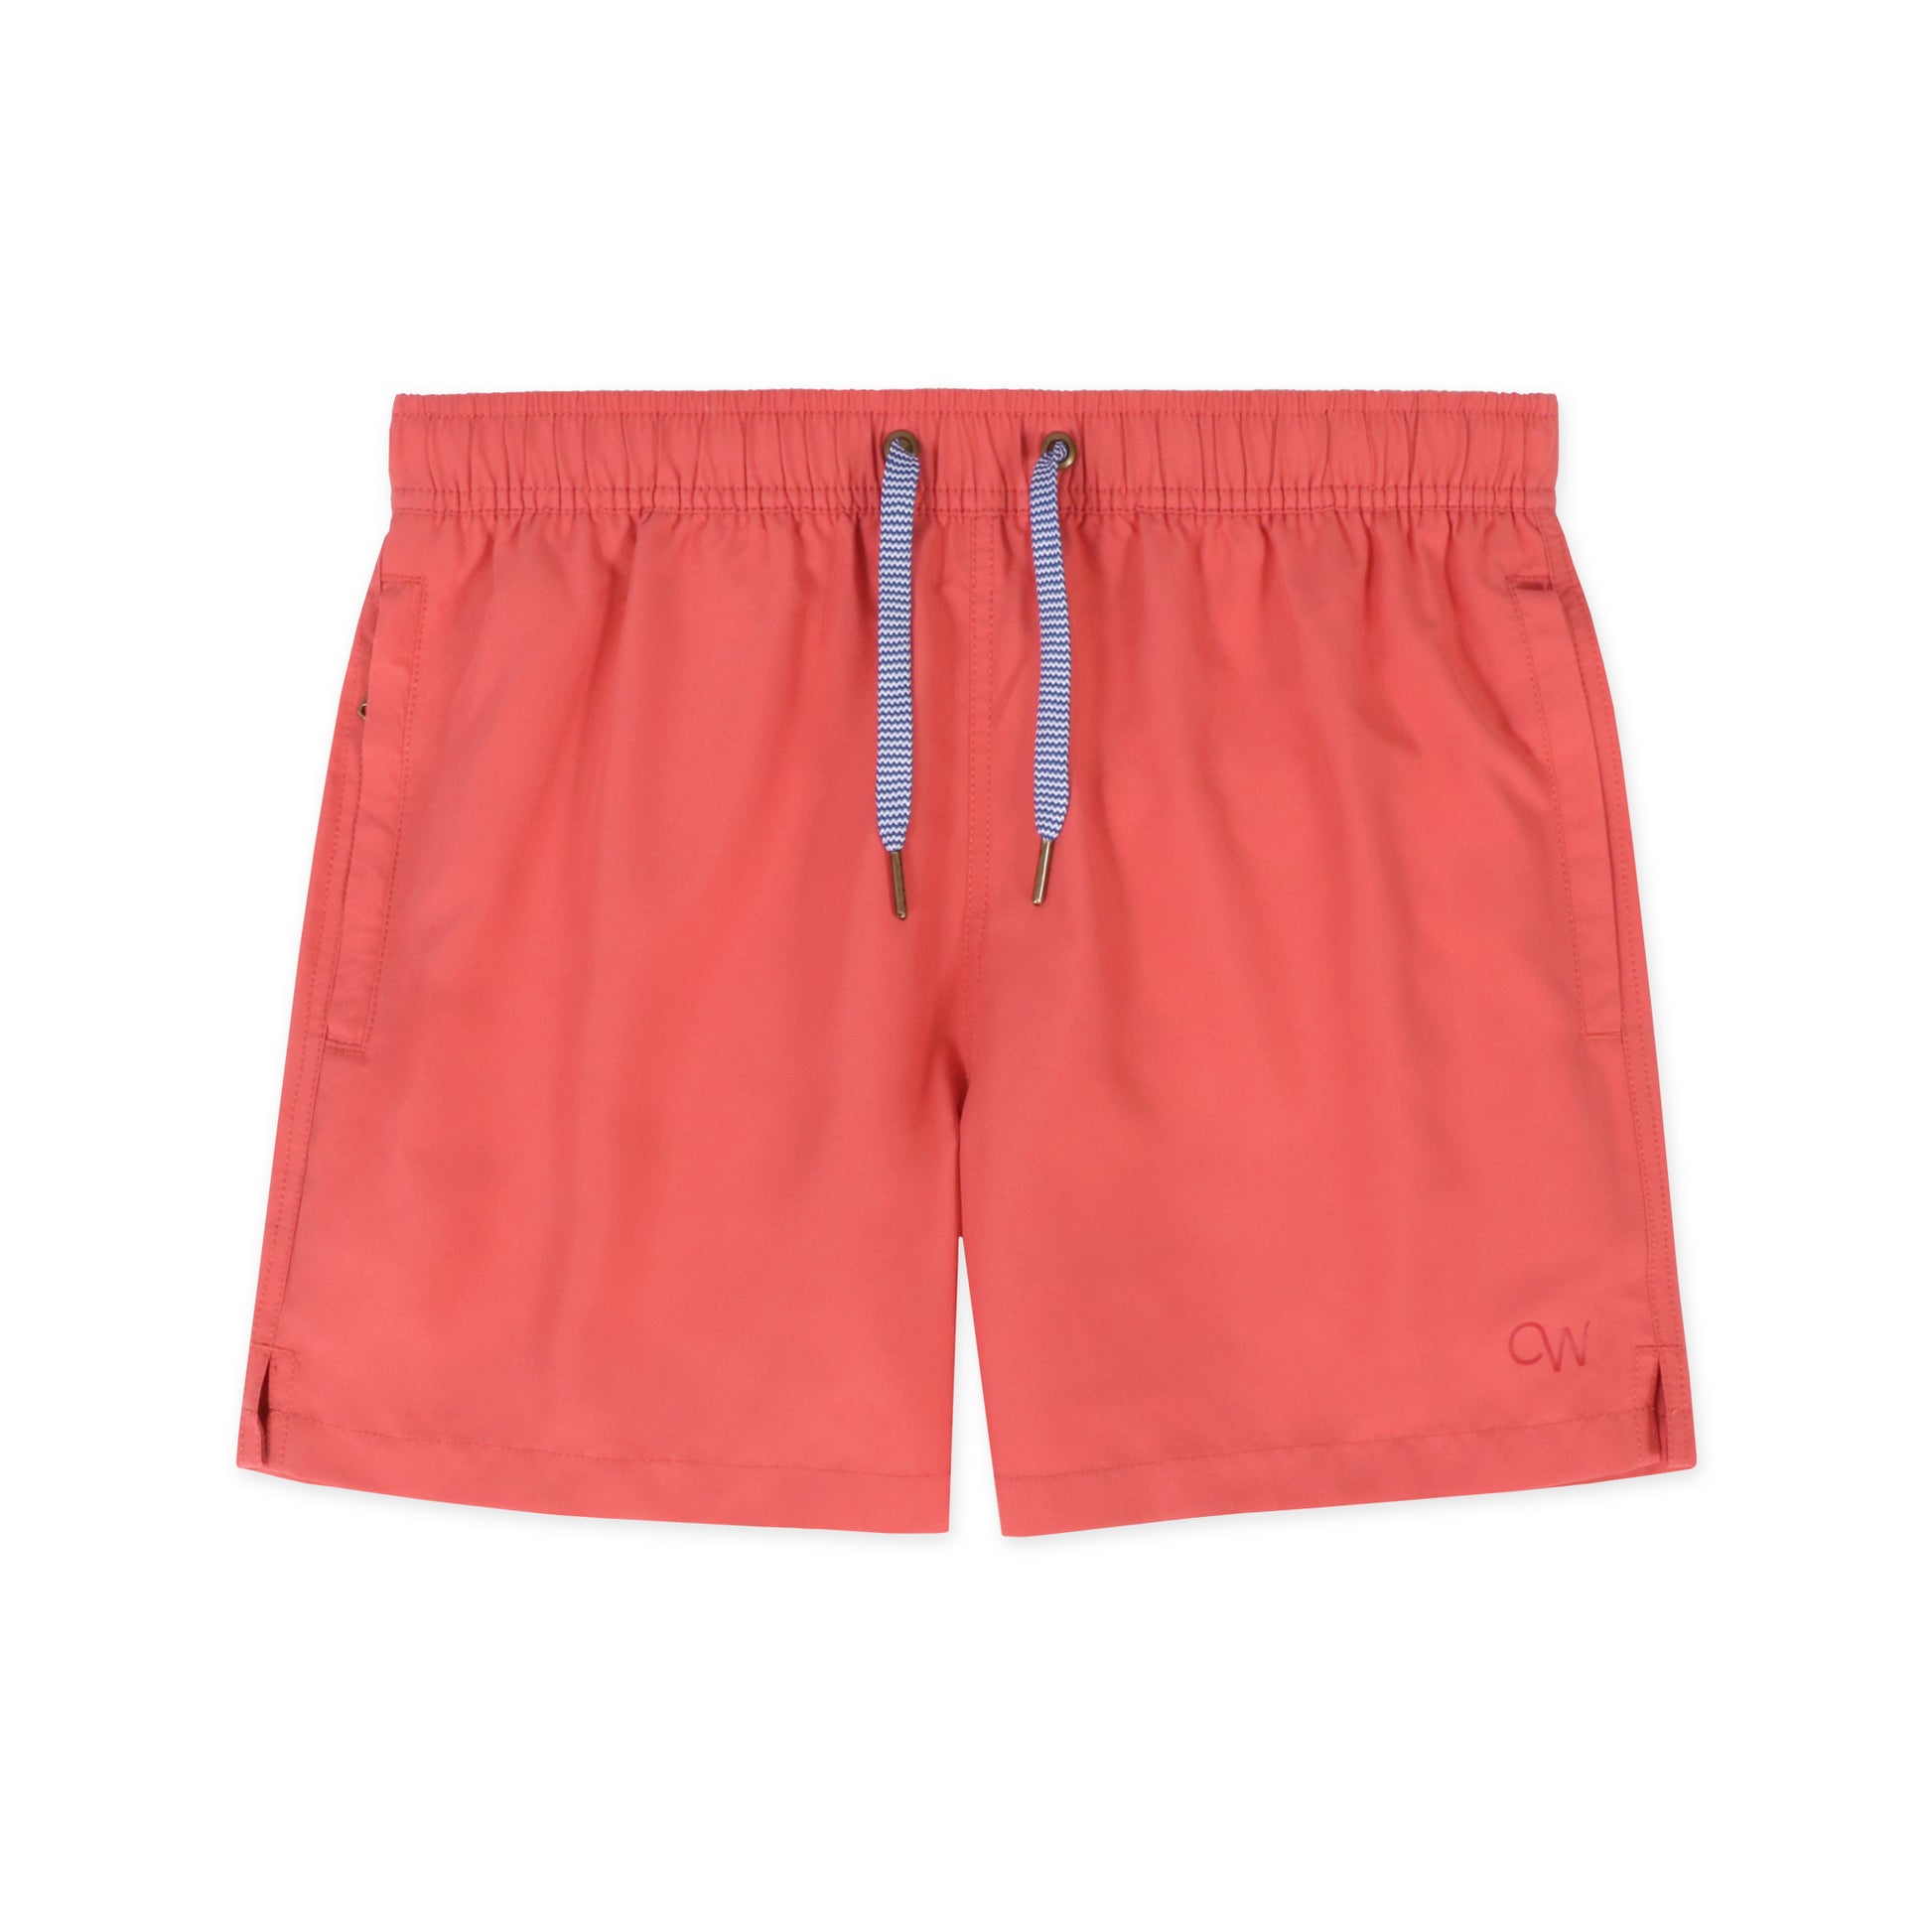 OWSS2201 Dark Coral Recycled Polyester Men's Swim Short